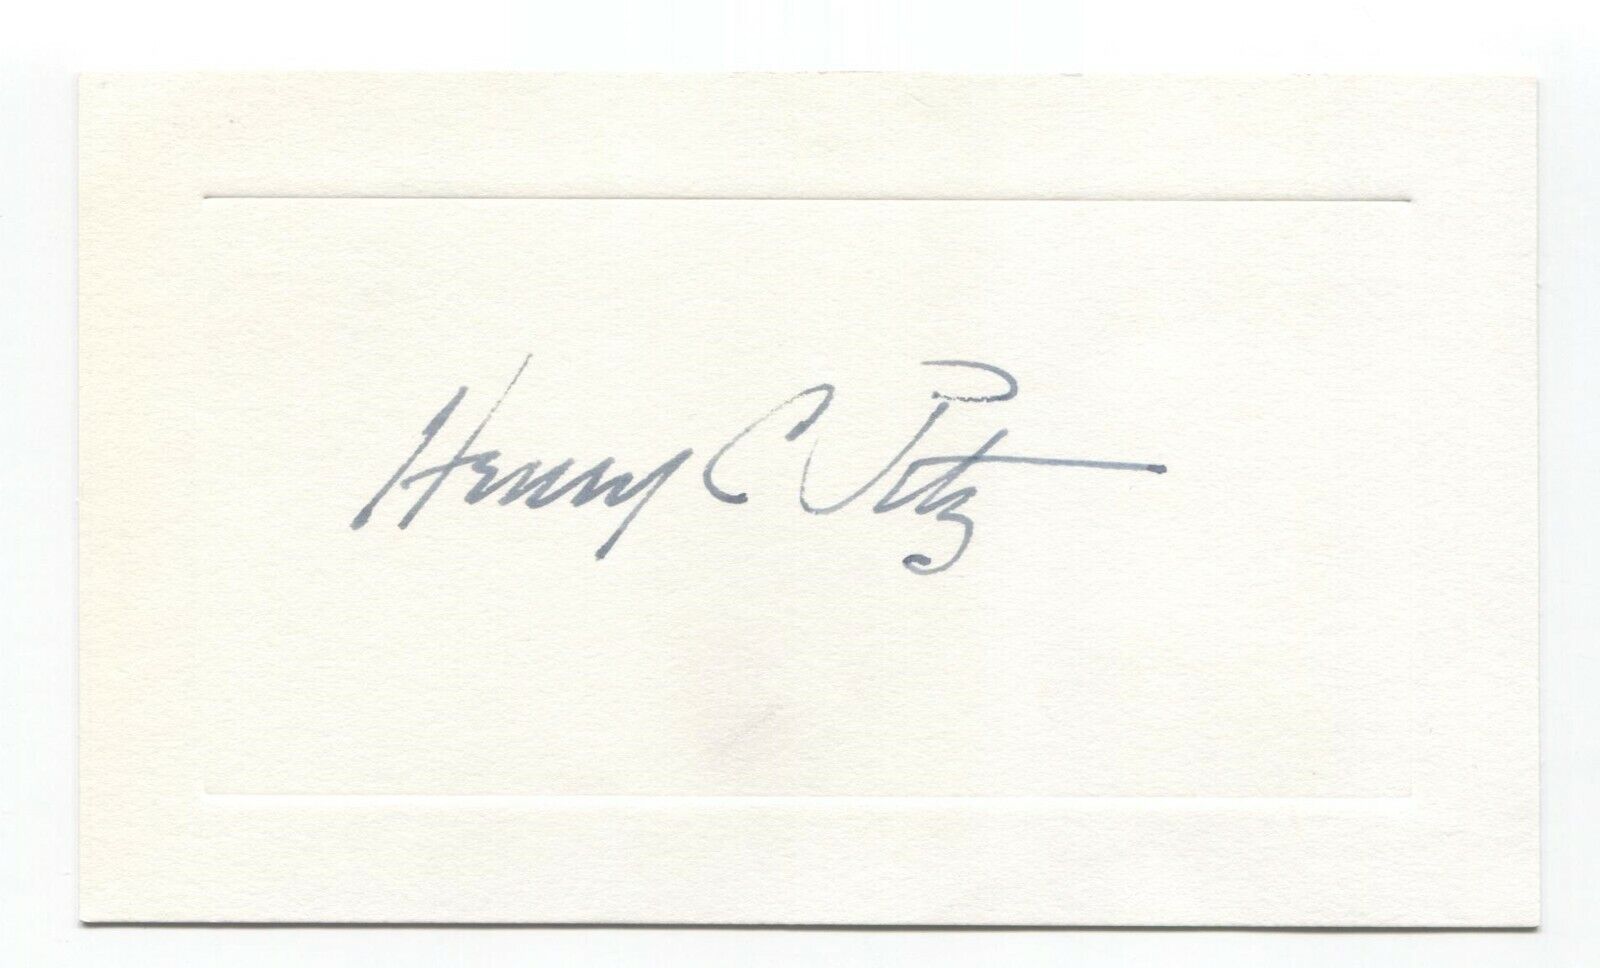 Henry Clarence Pitz Pitts Signed Card Autographed Signature Artist Illustrator